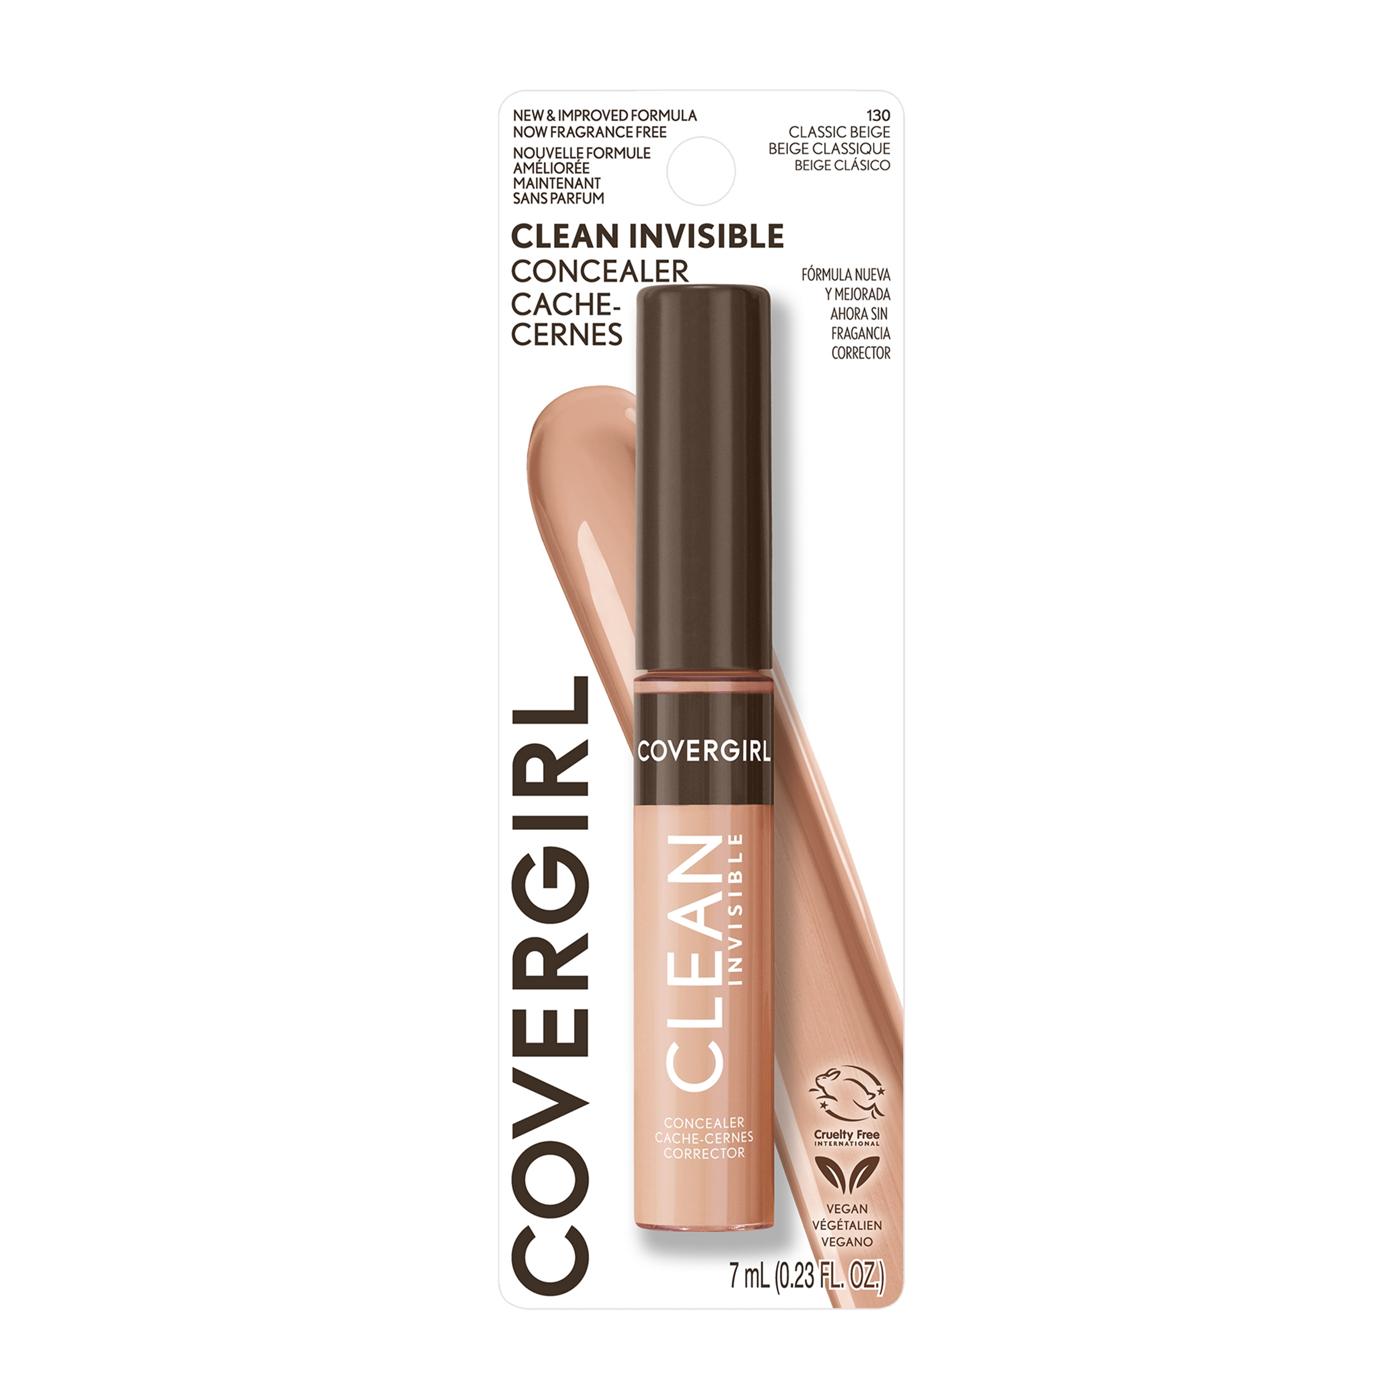 Covergirl Clean Invisible Concealer - Classic Beige; image 1 of 15